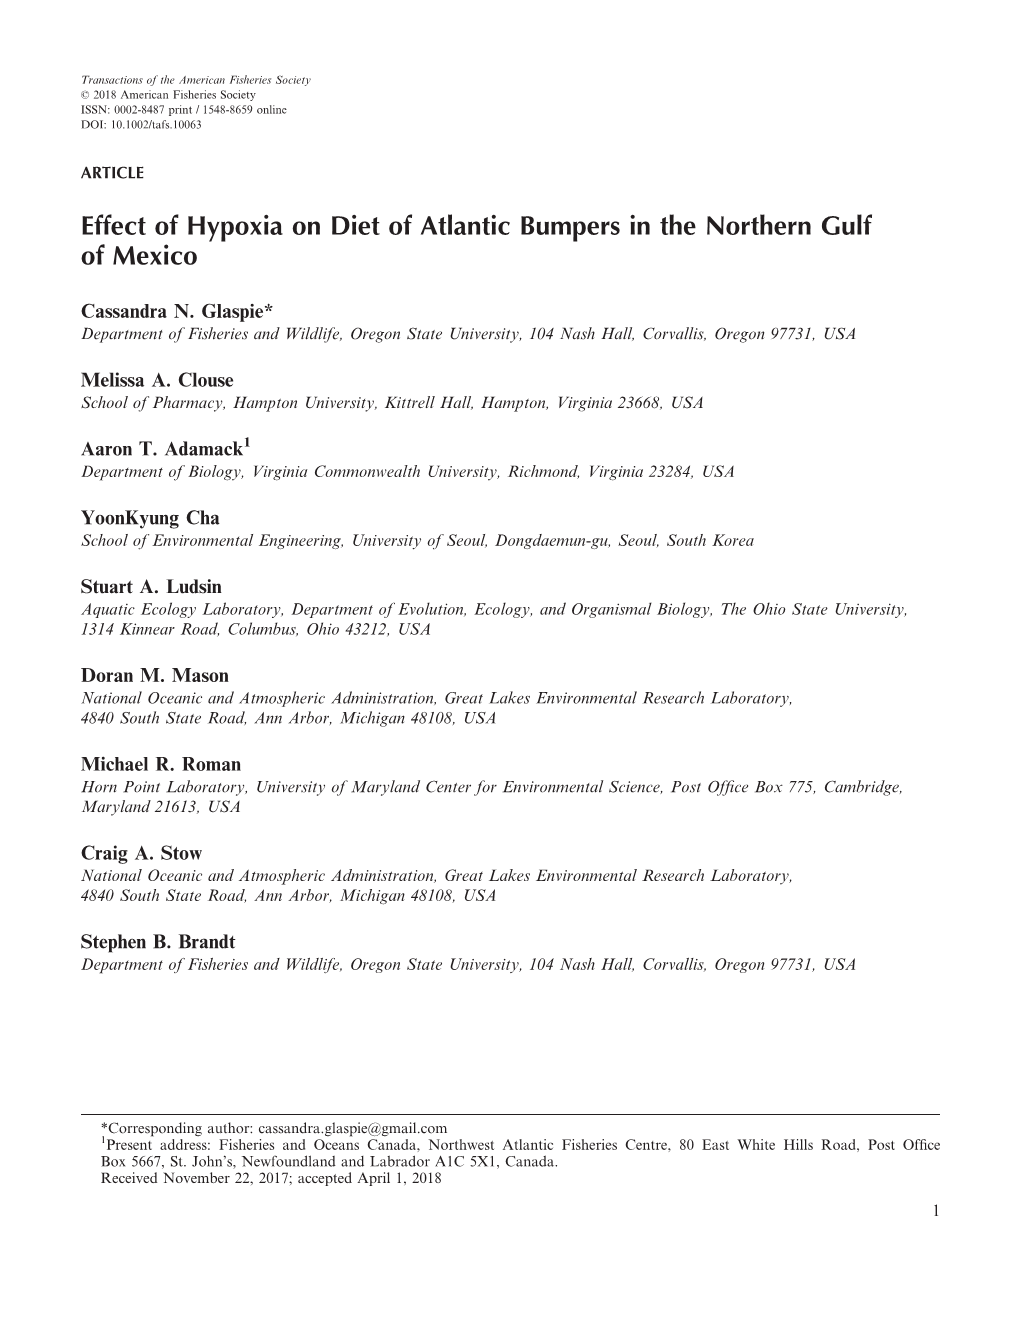 Effect of Hypoxia on Diet of Atlantic Bumpers in the Northern Gulf of Mexico